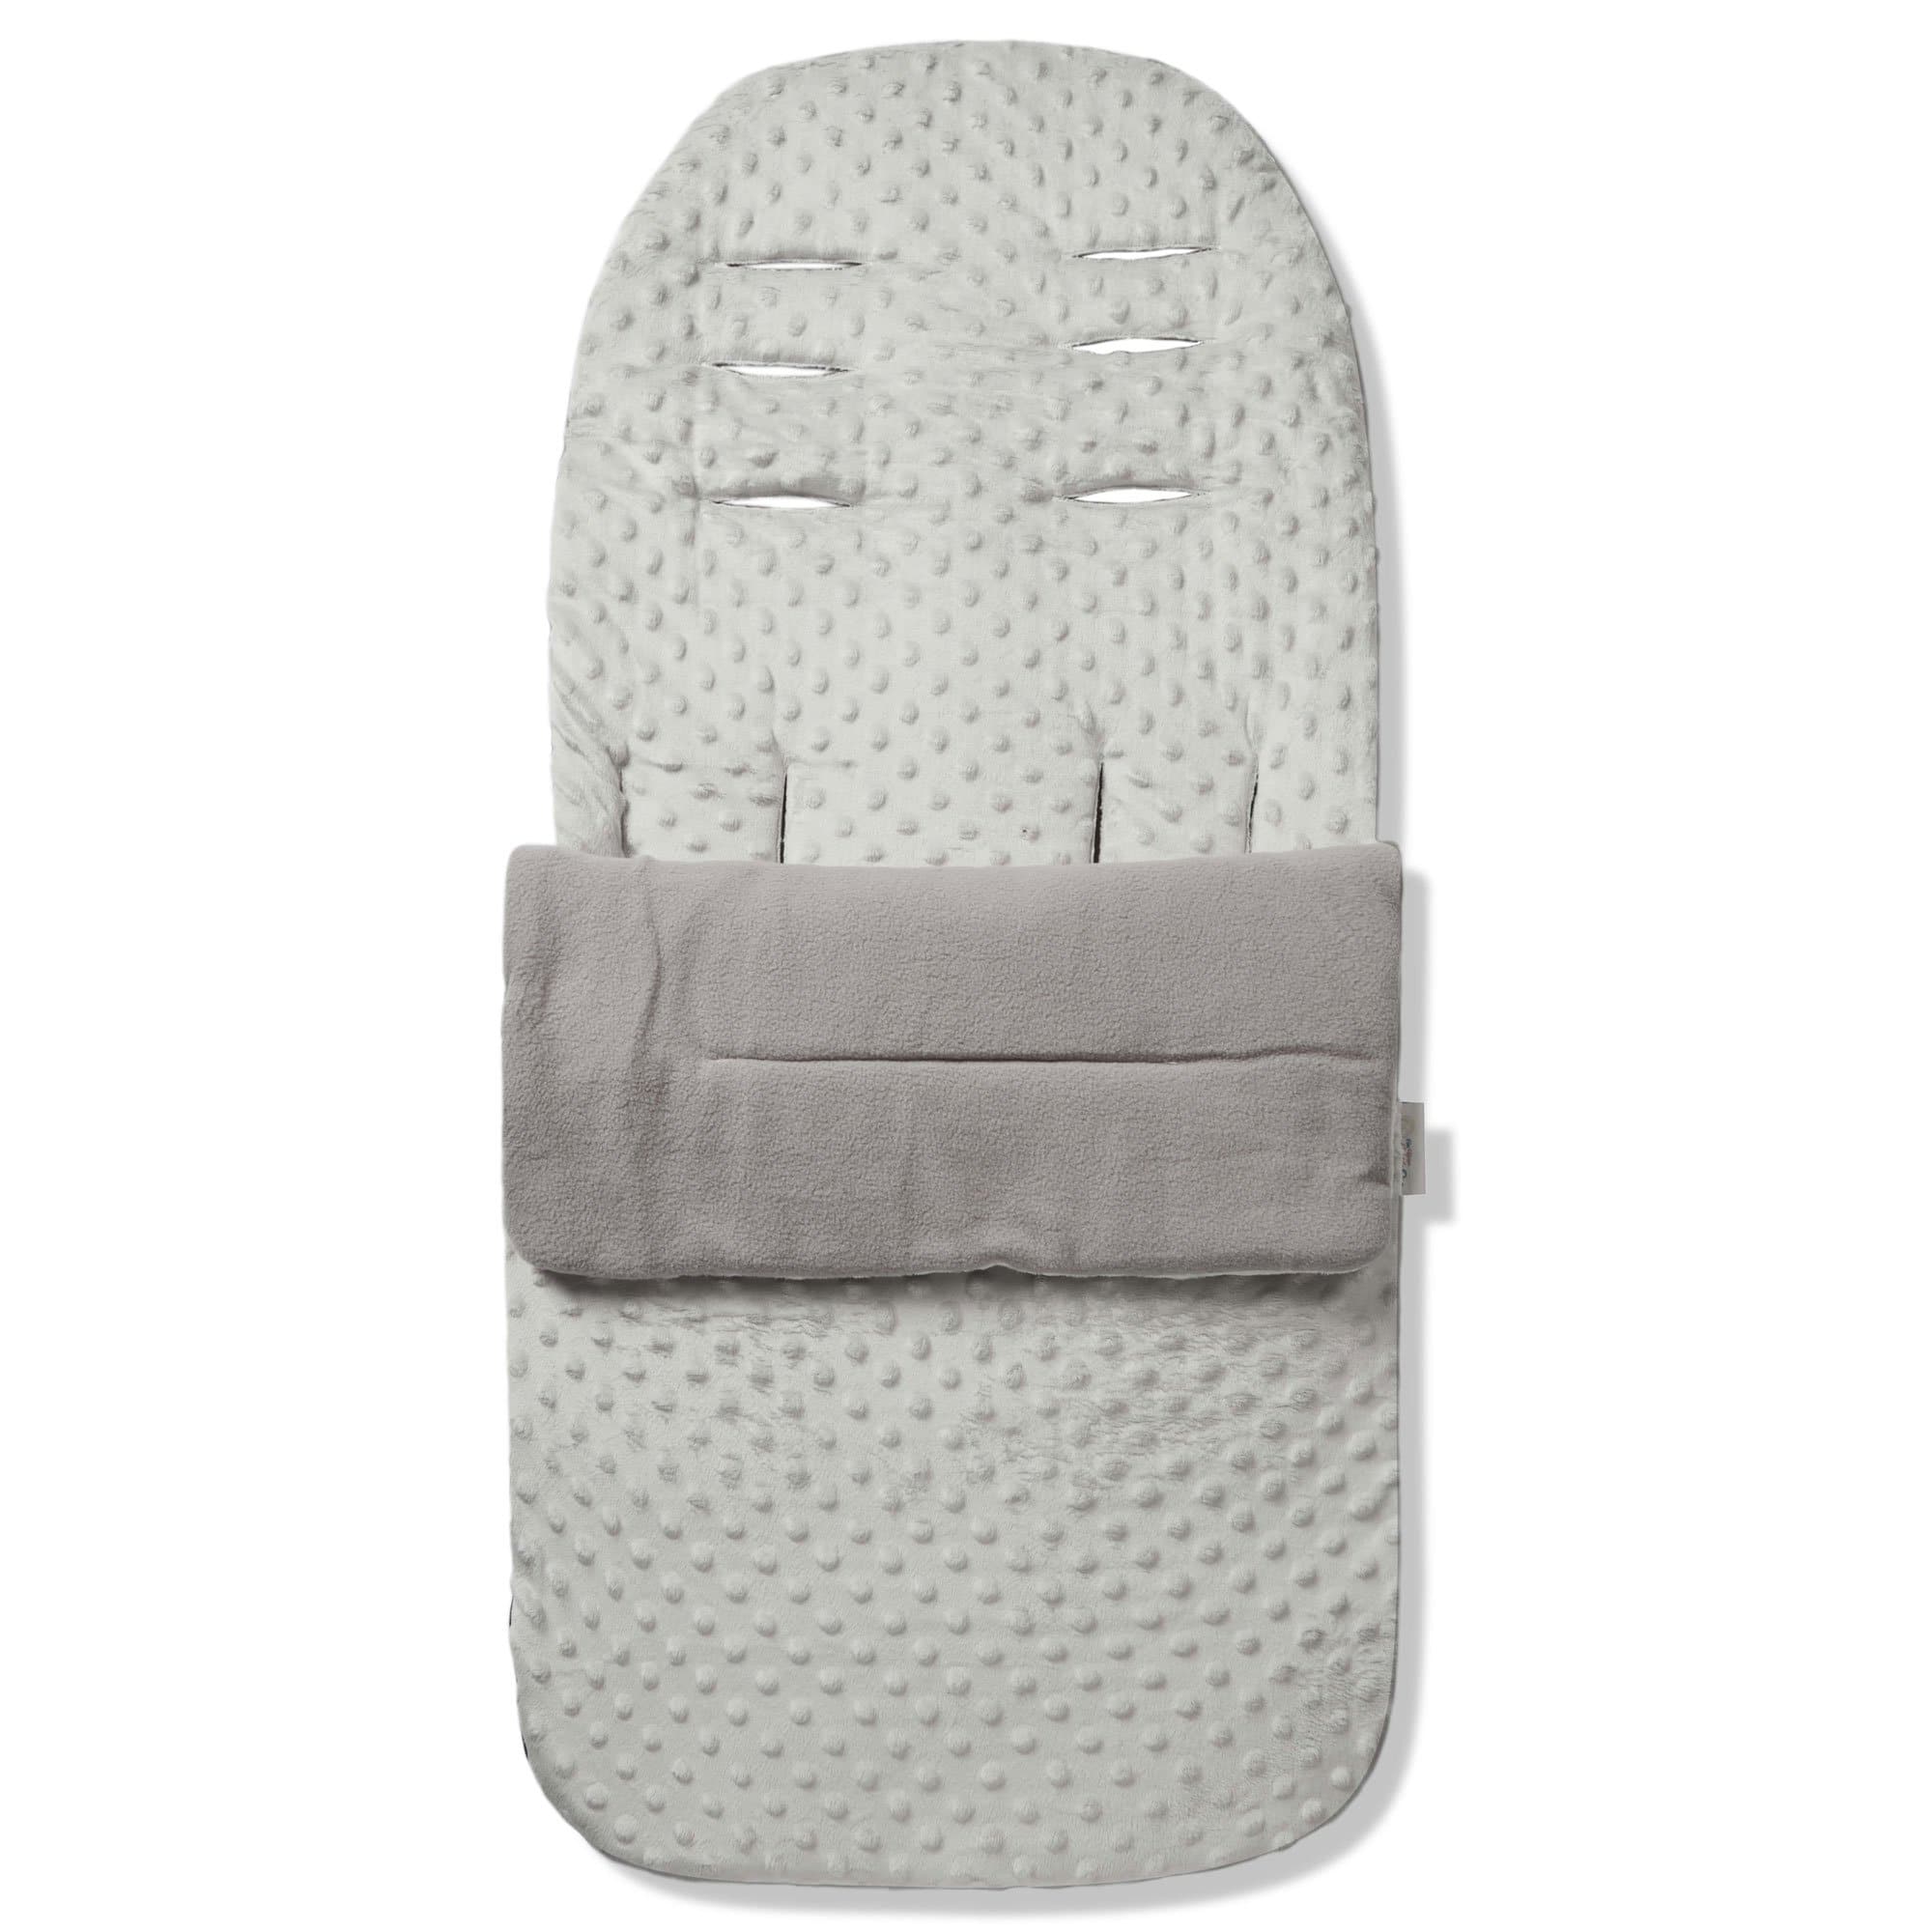 Dimple Footmuff / Cosy Toes Compatible with Bebe Confort - Grey / Fits All Models | For Your Little One